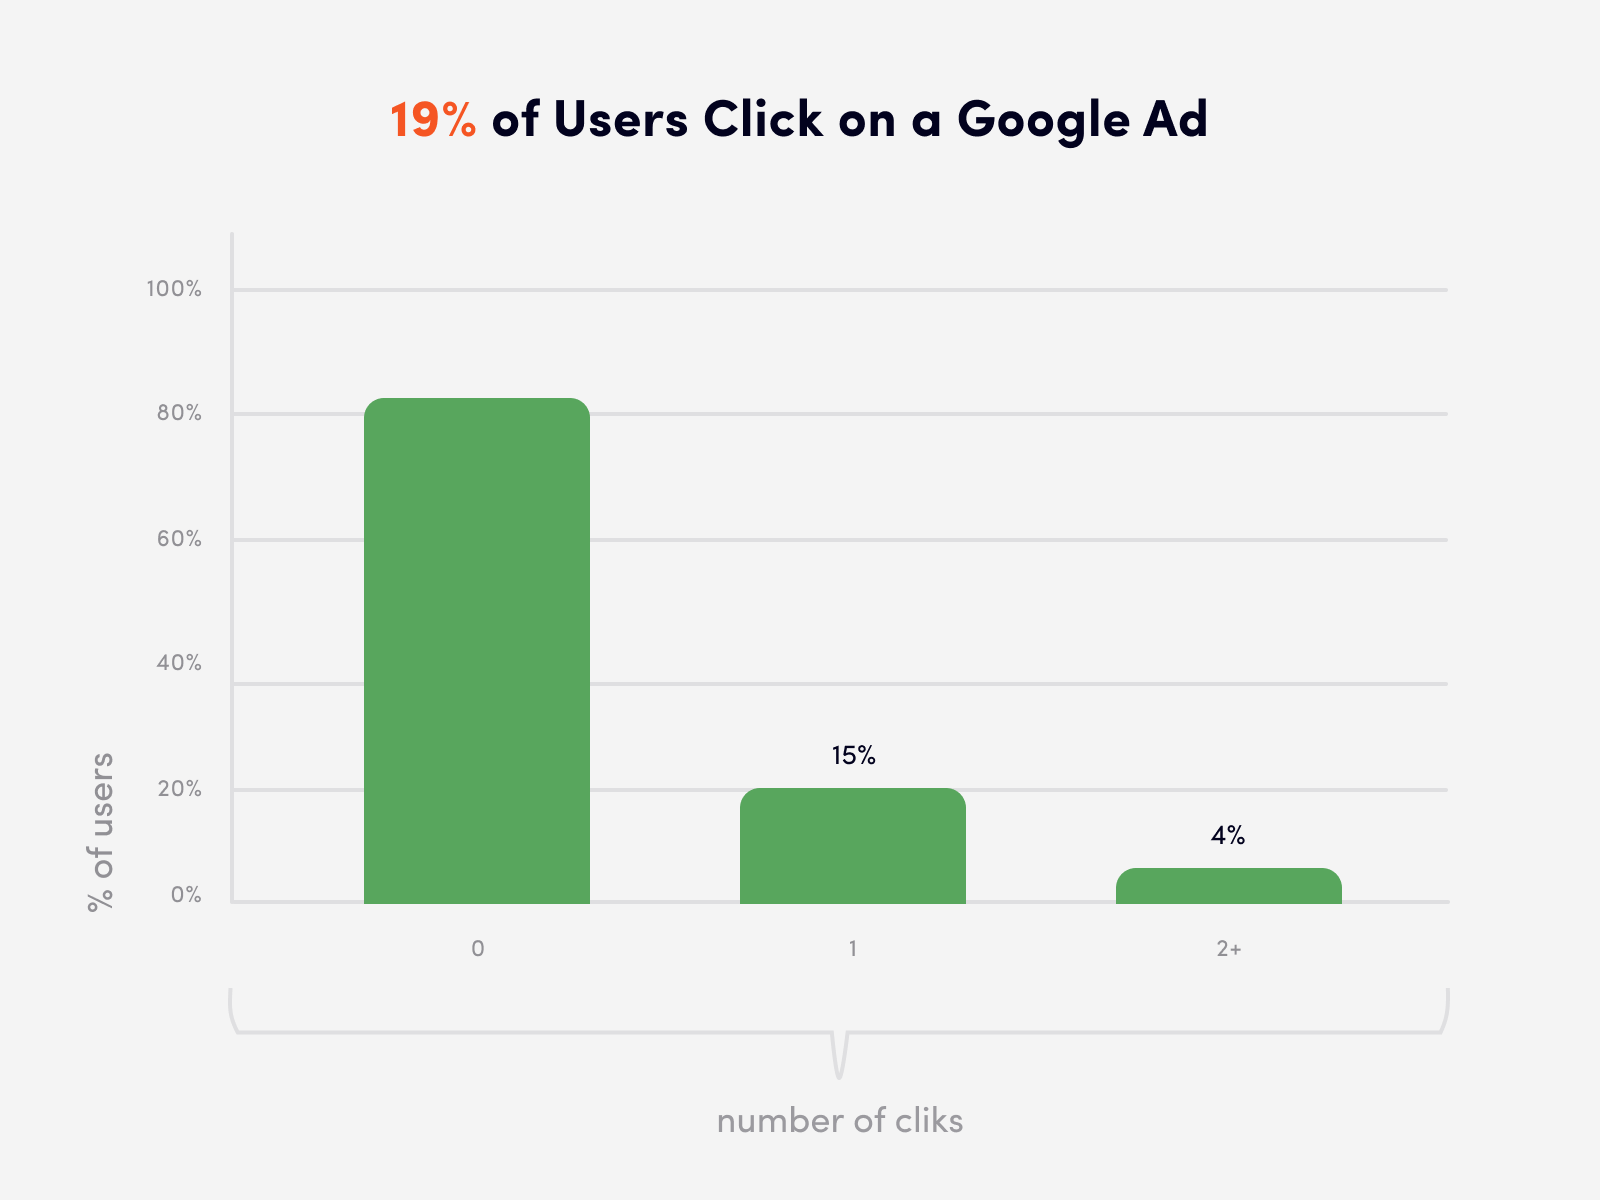 The number of users directed to websites through ad clicks